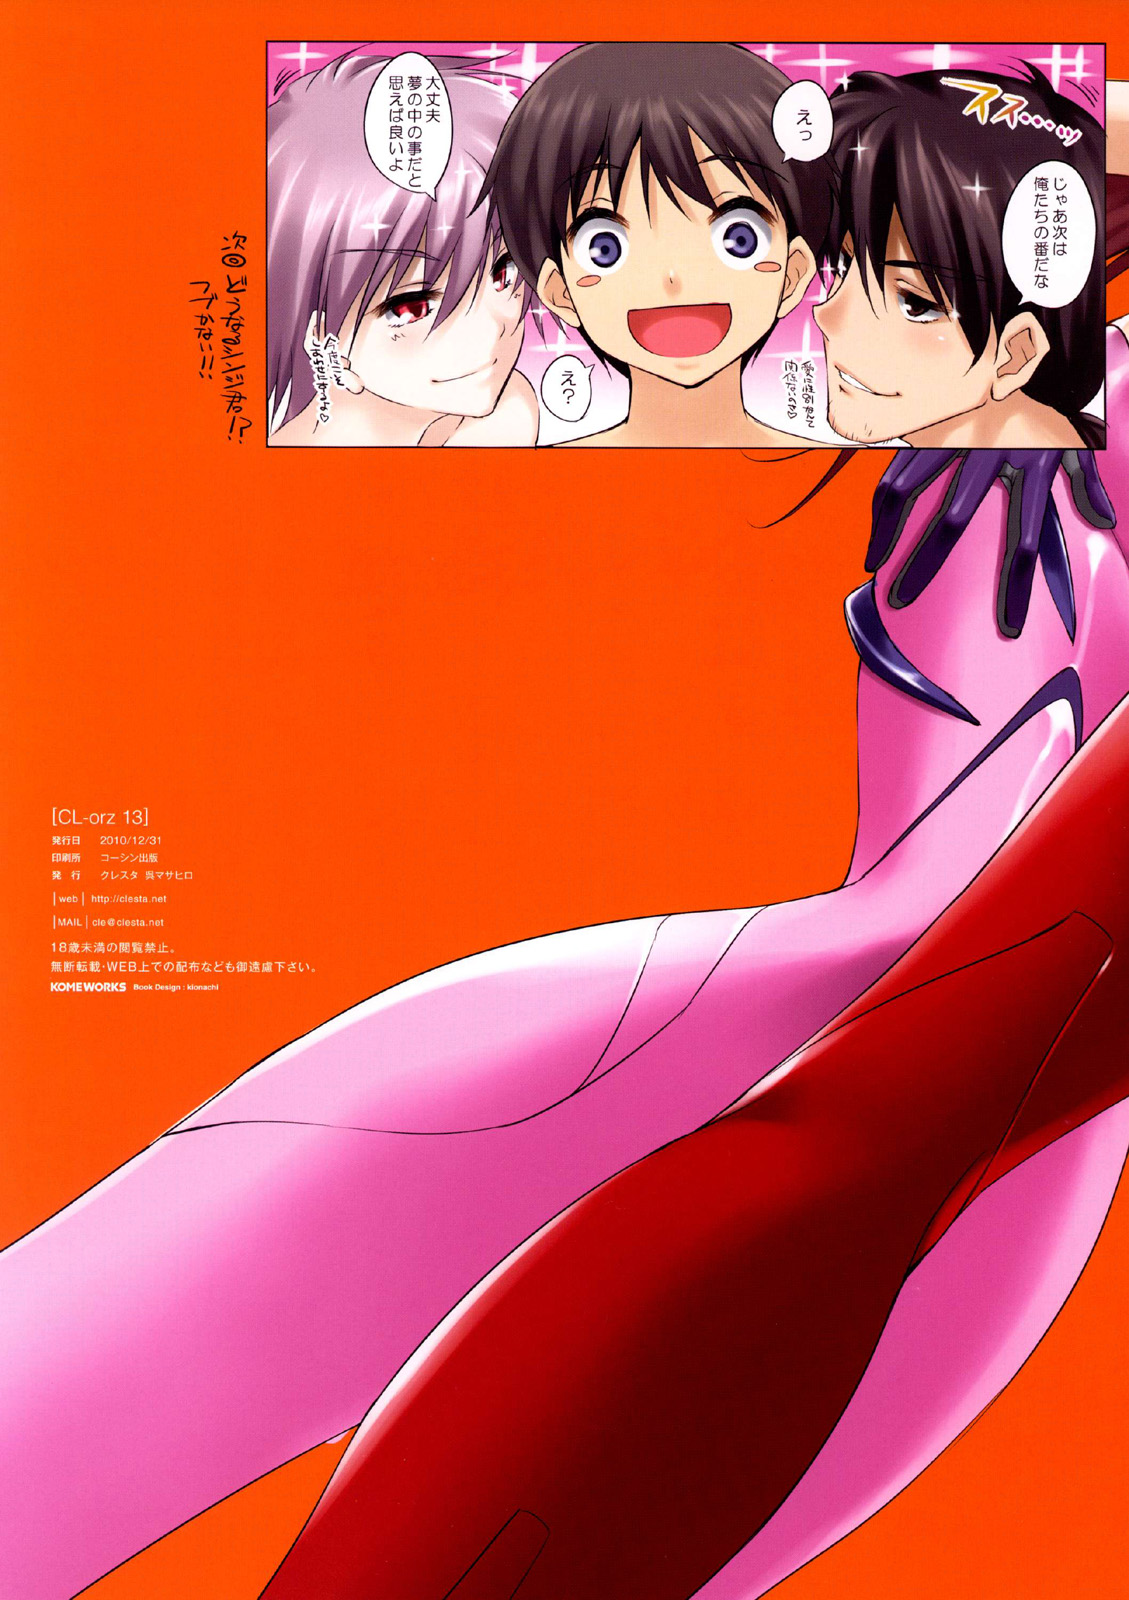 (C79) [Clesta (Cle Masahiro)] CL-orz: 13 - You Can (Not) Advance. (Rebuild of Evangelion) page 15 full